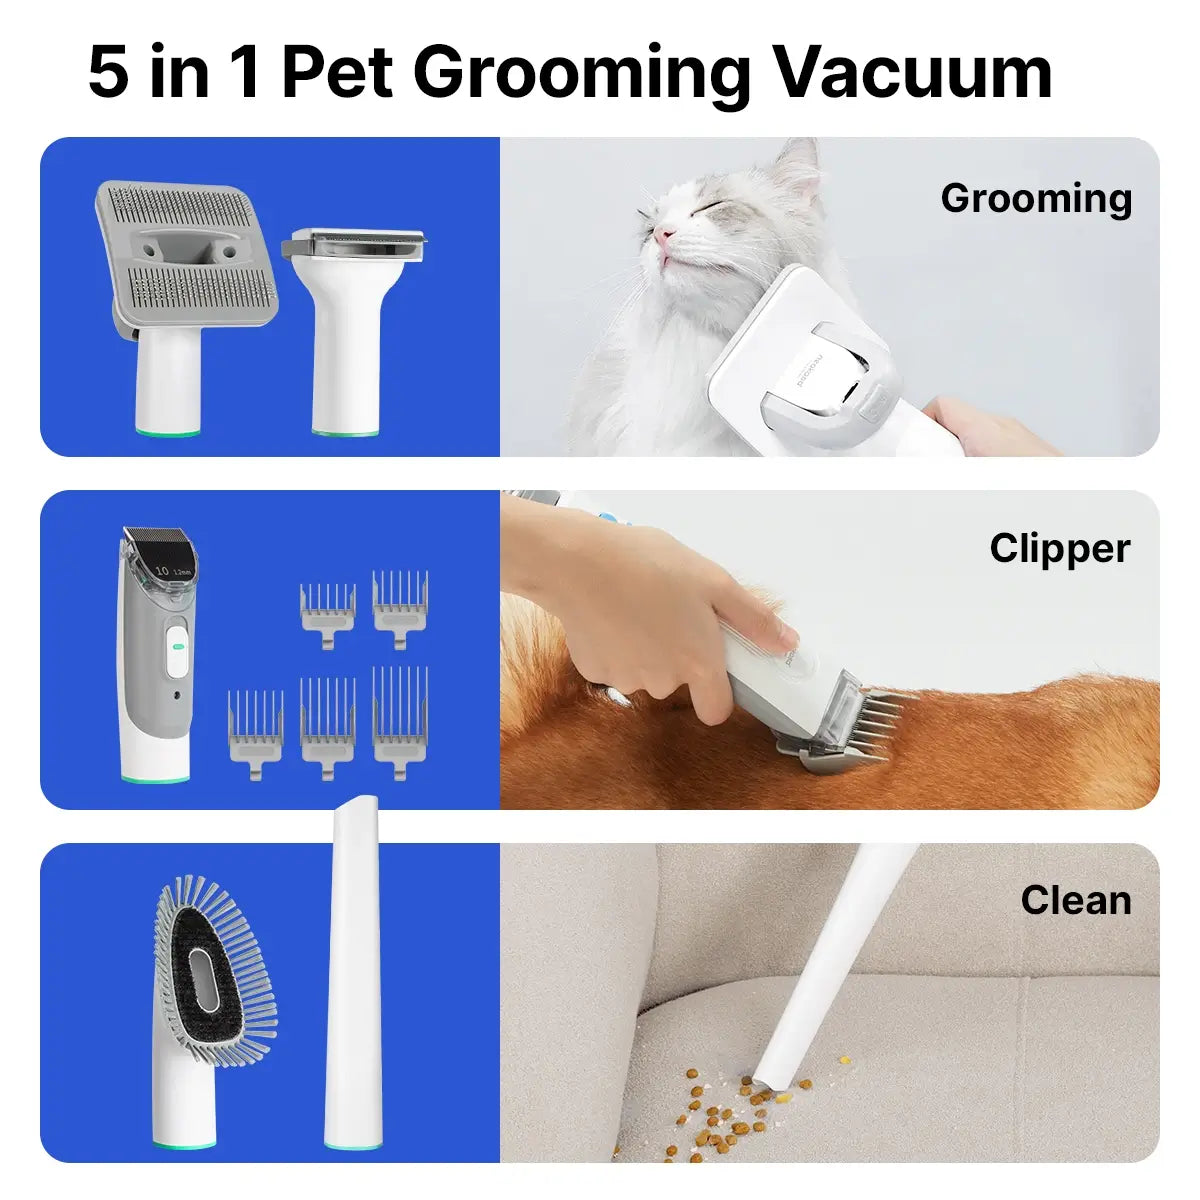 Neakasa P1 Pro 5-in-1 Pet Grooming Vacuum for Dogs Cats